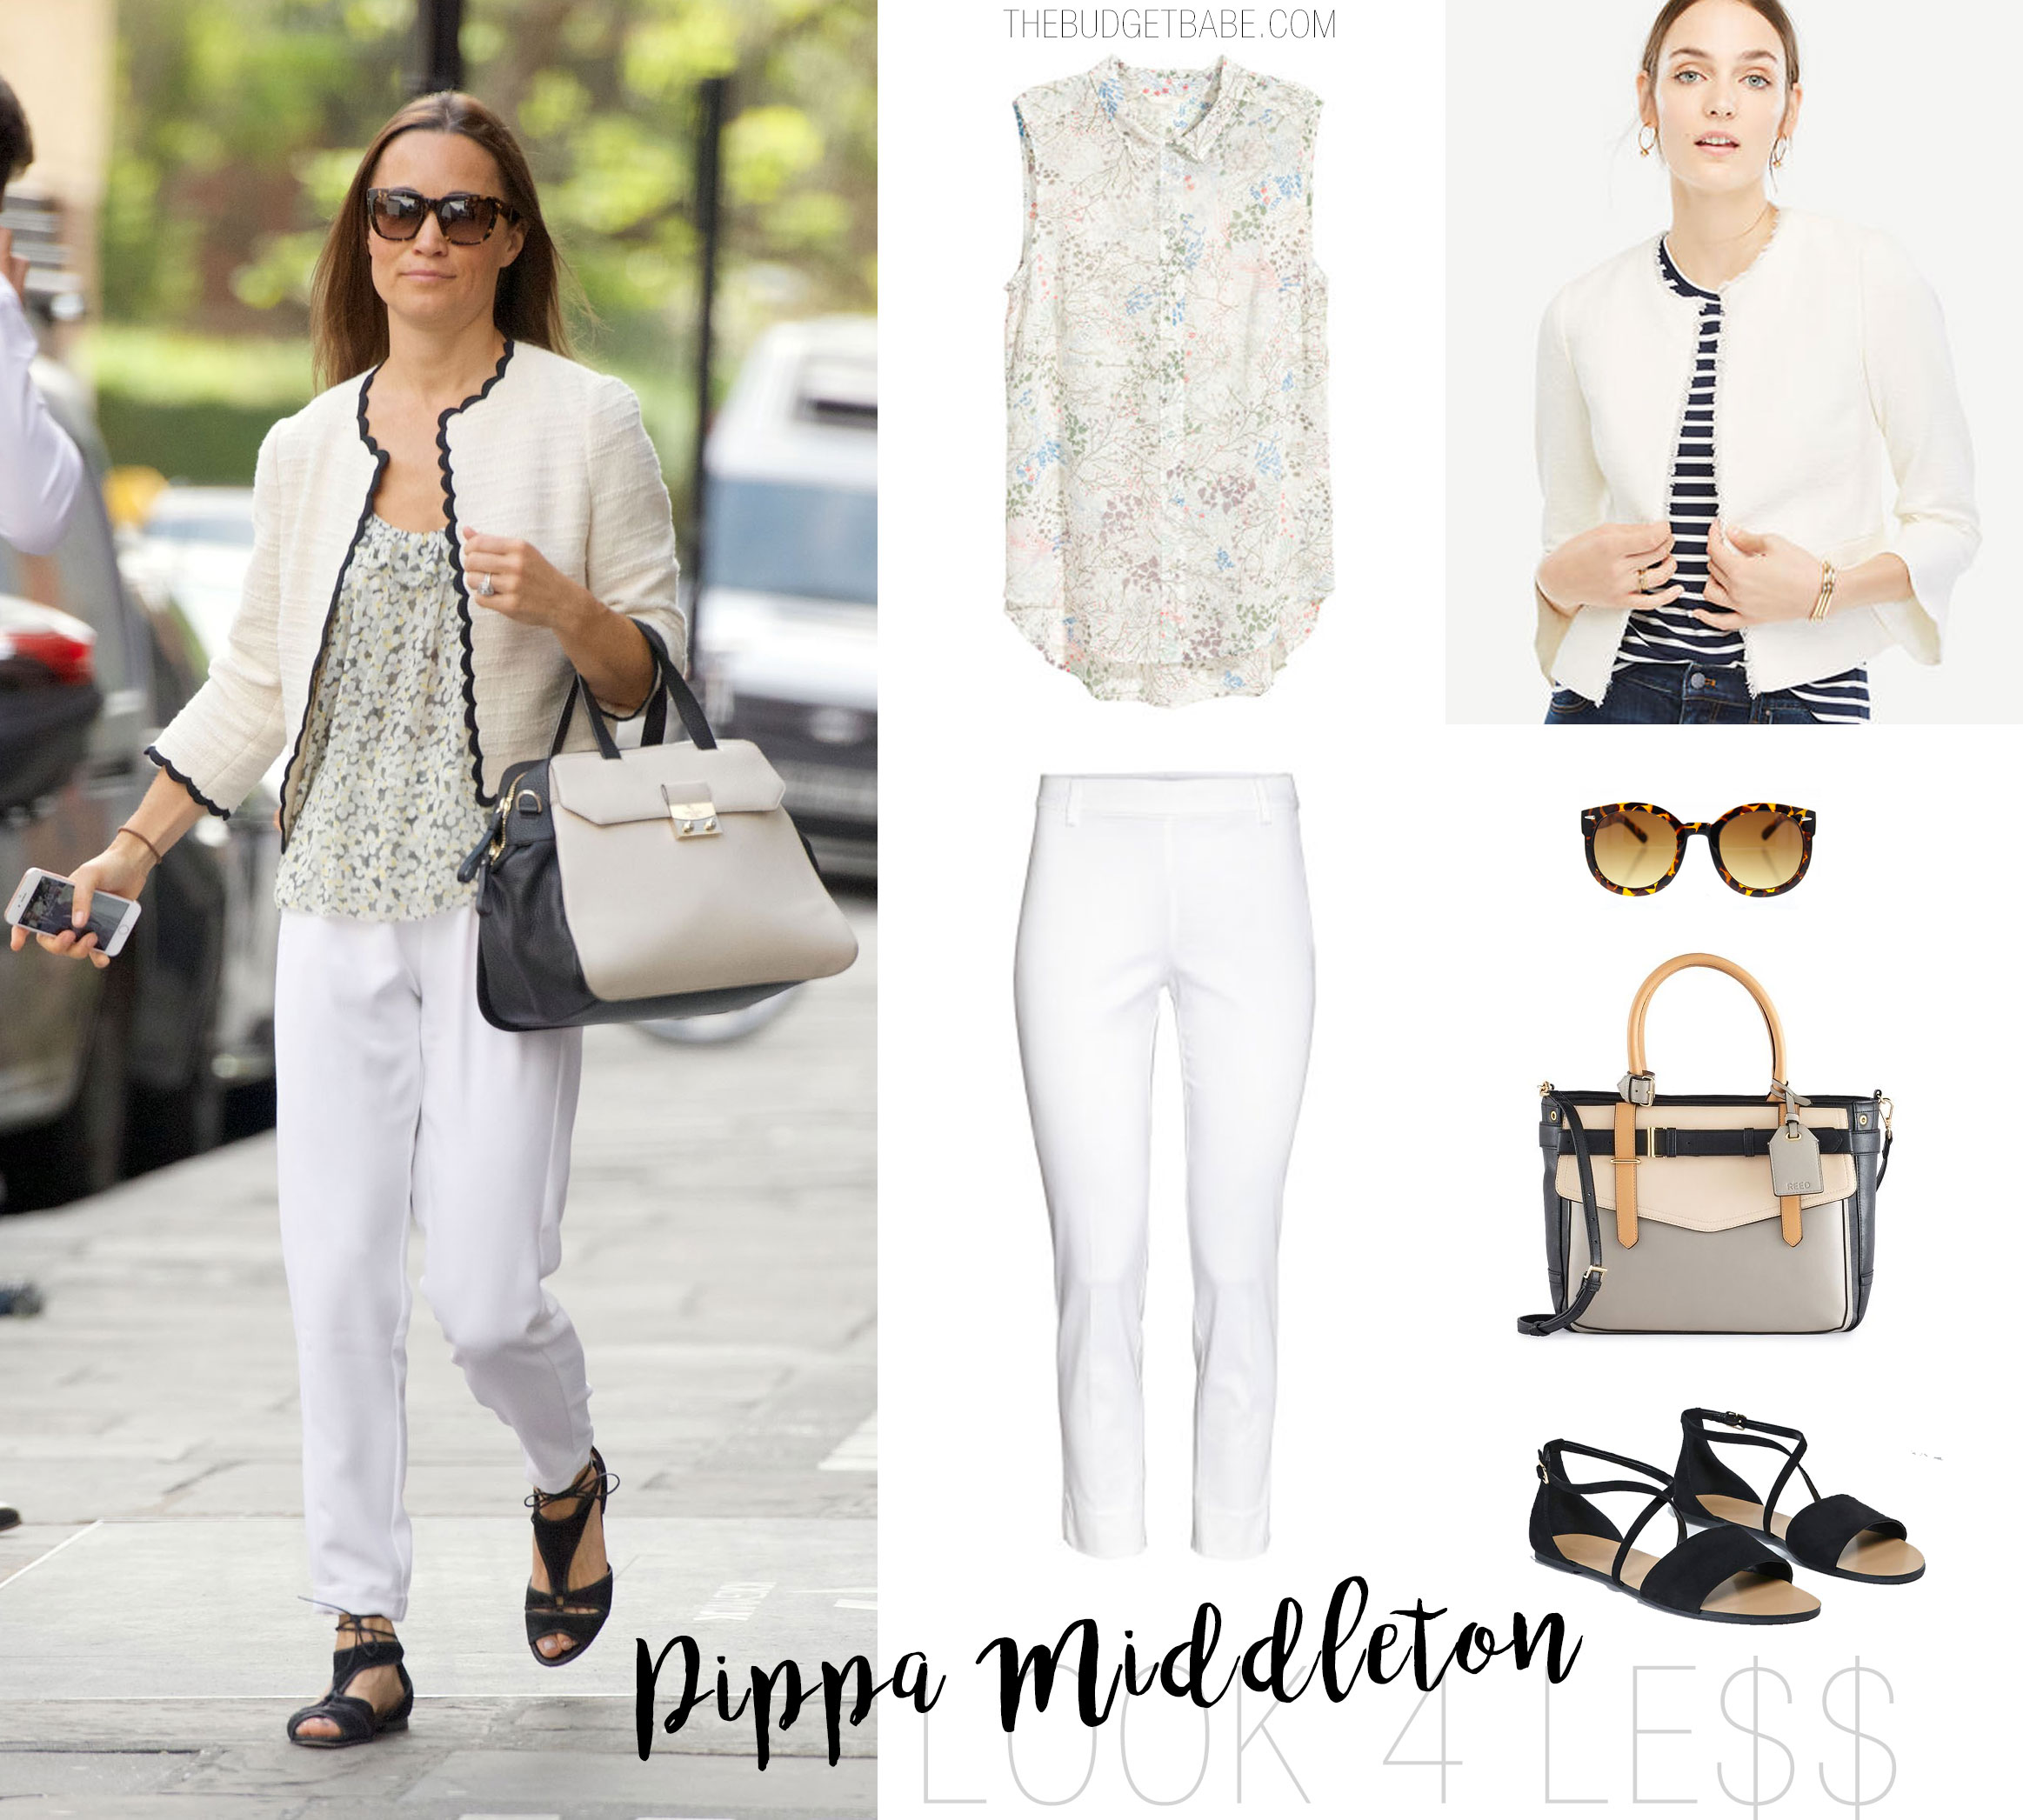 Pippa Middleton's summer style features a white tweed blazer with black scallop trim and white pants.